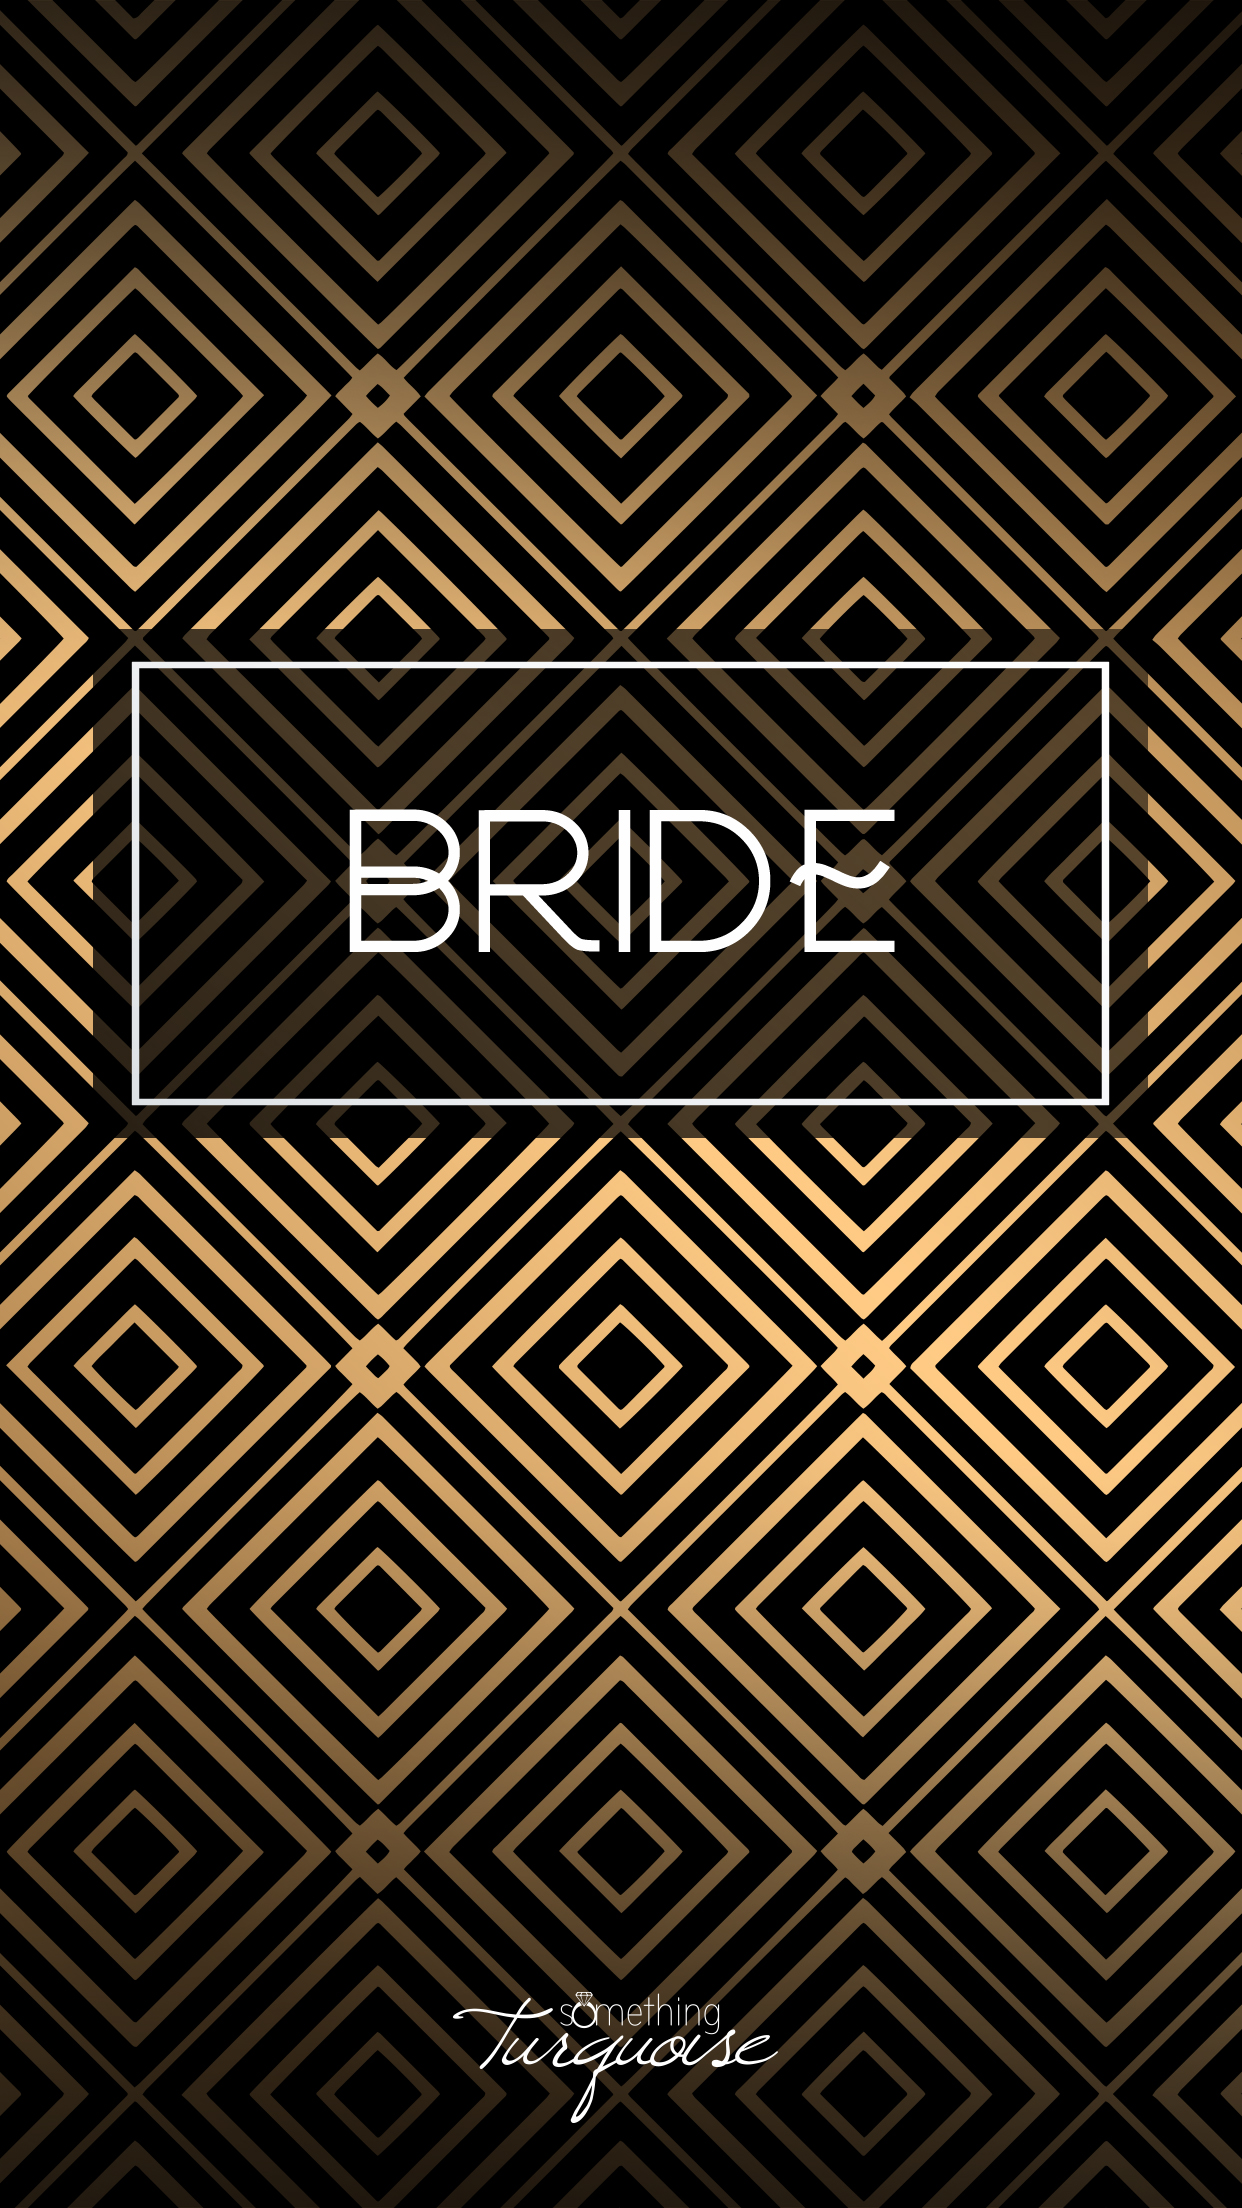 Check out this gorgeous BRIDE iPhone wallpaper, it's free!